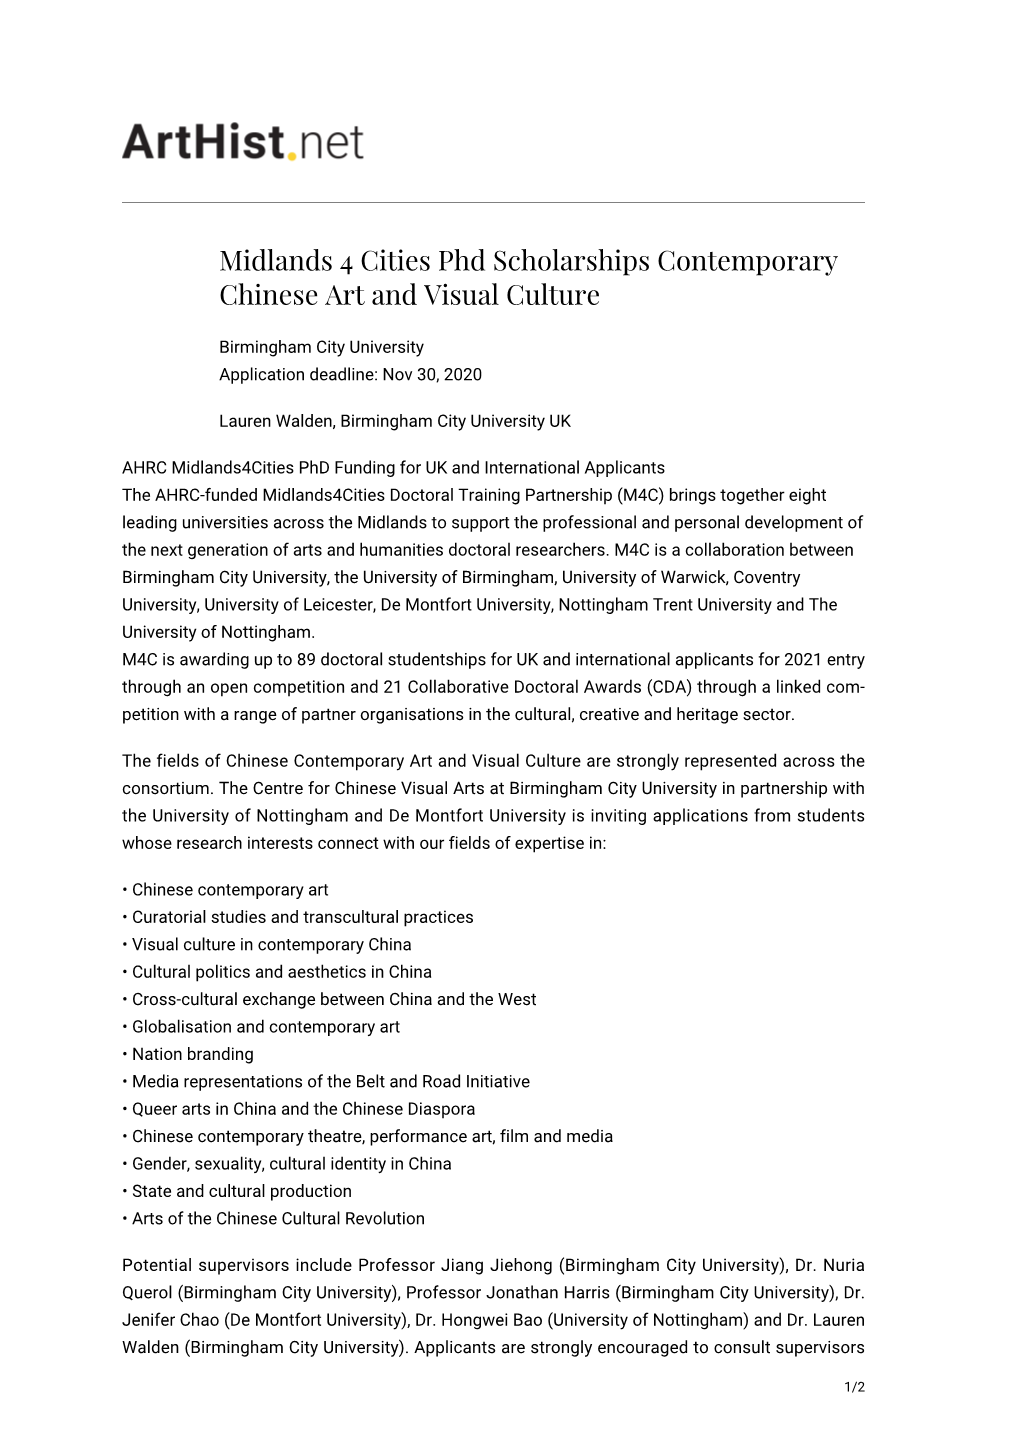 Midlands 4 Cities Phd Scholarships Contemporary Chinese Art and Visual Culture